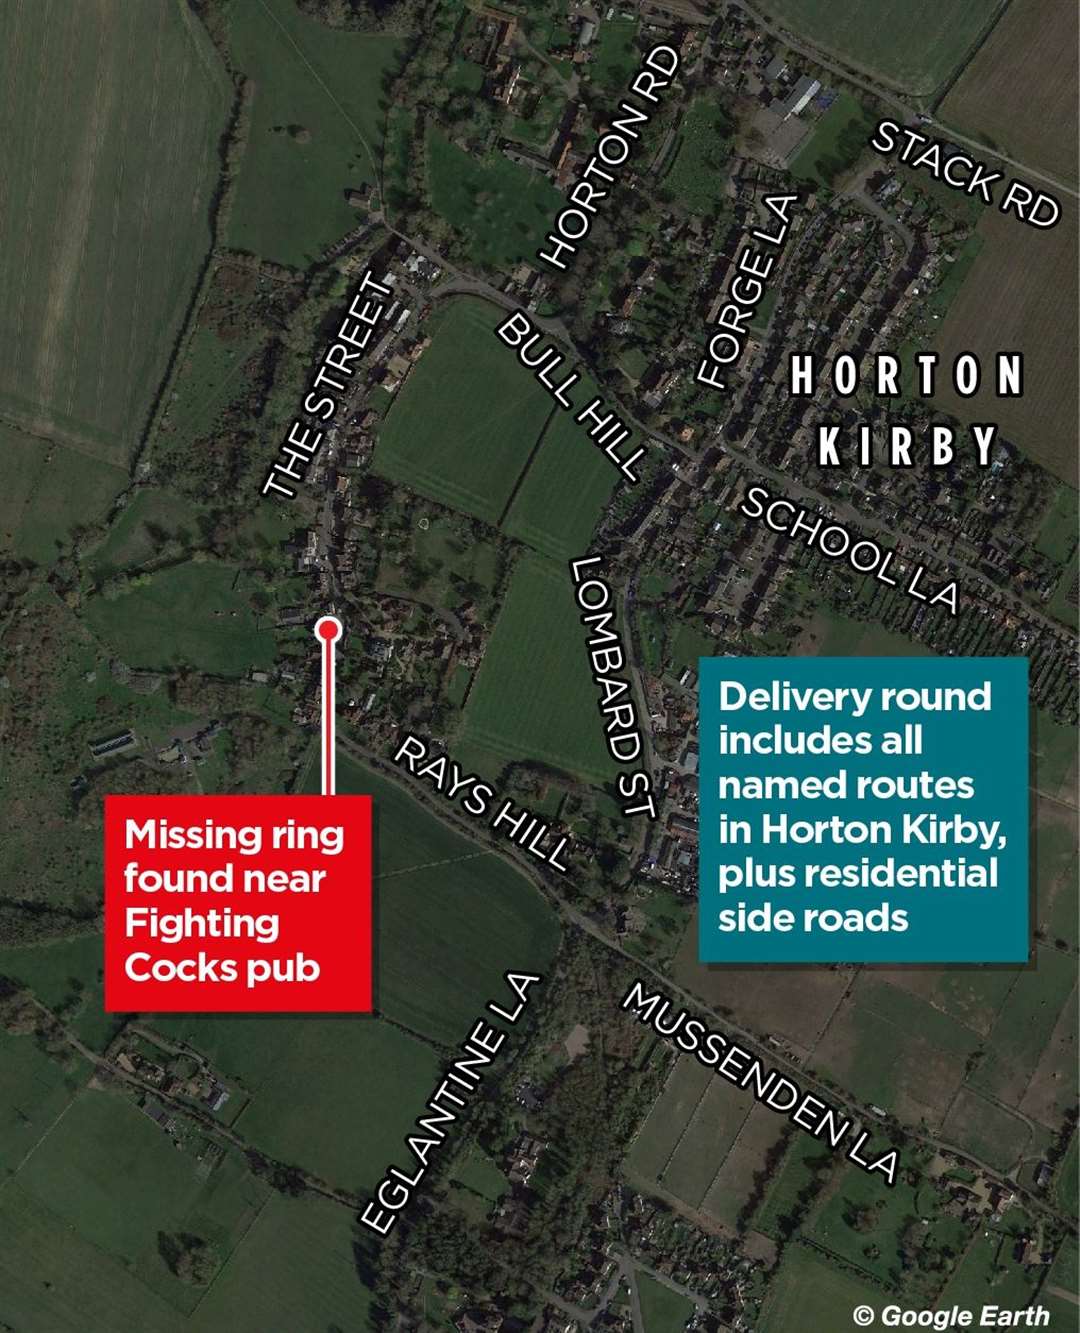 Adrian's route around Horton Kirby and South Darenth covers around 11 miles